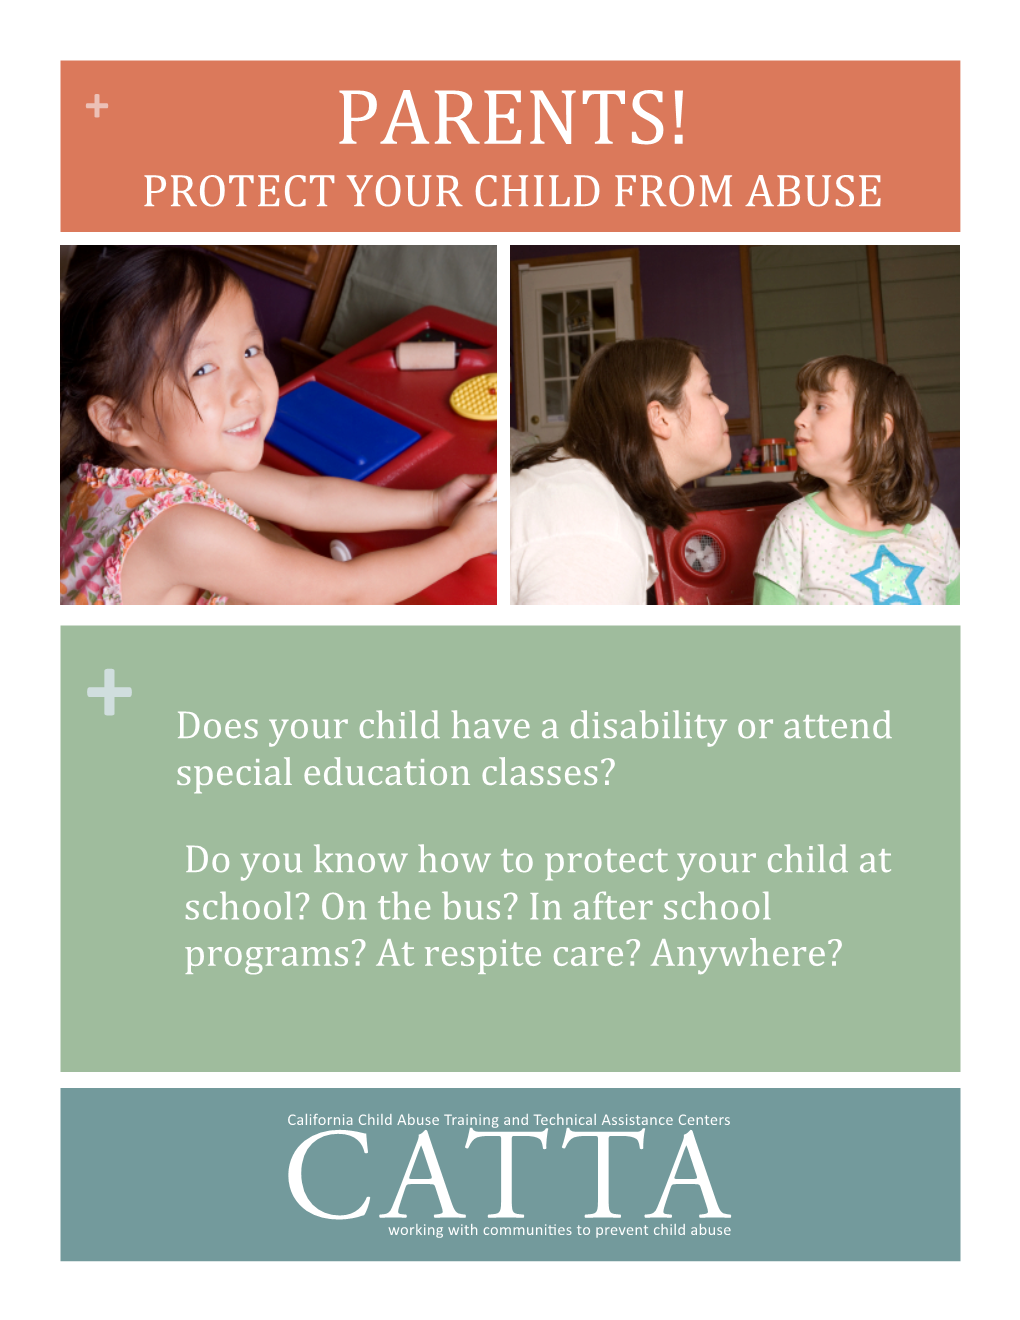 Protect Your Child from Abuse